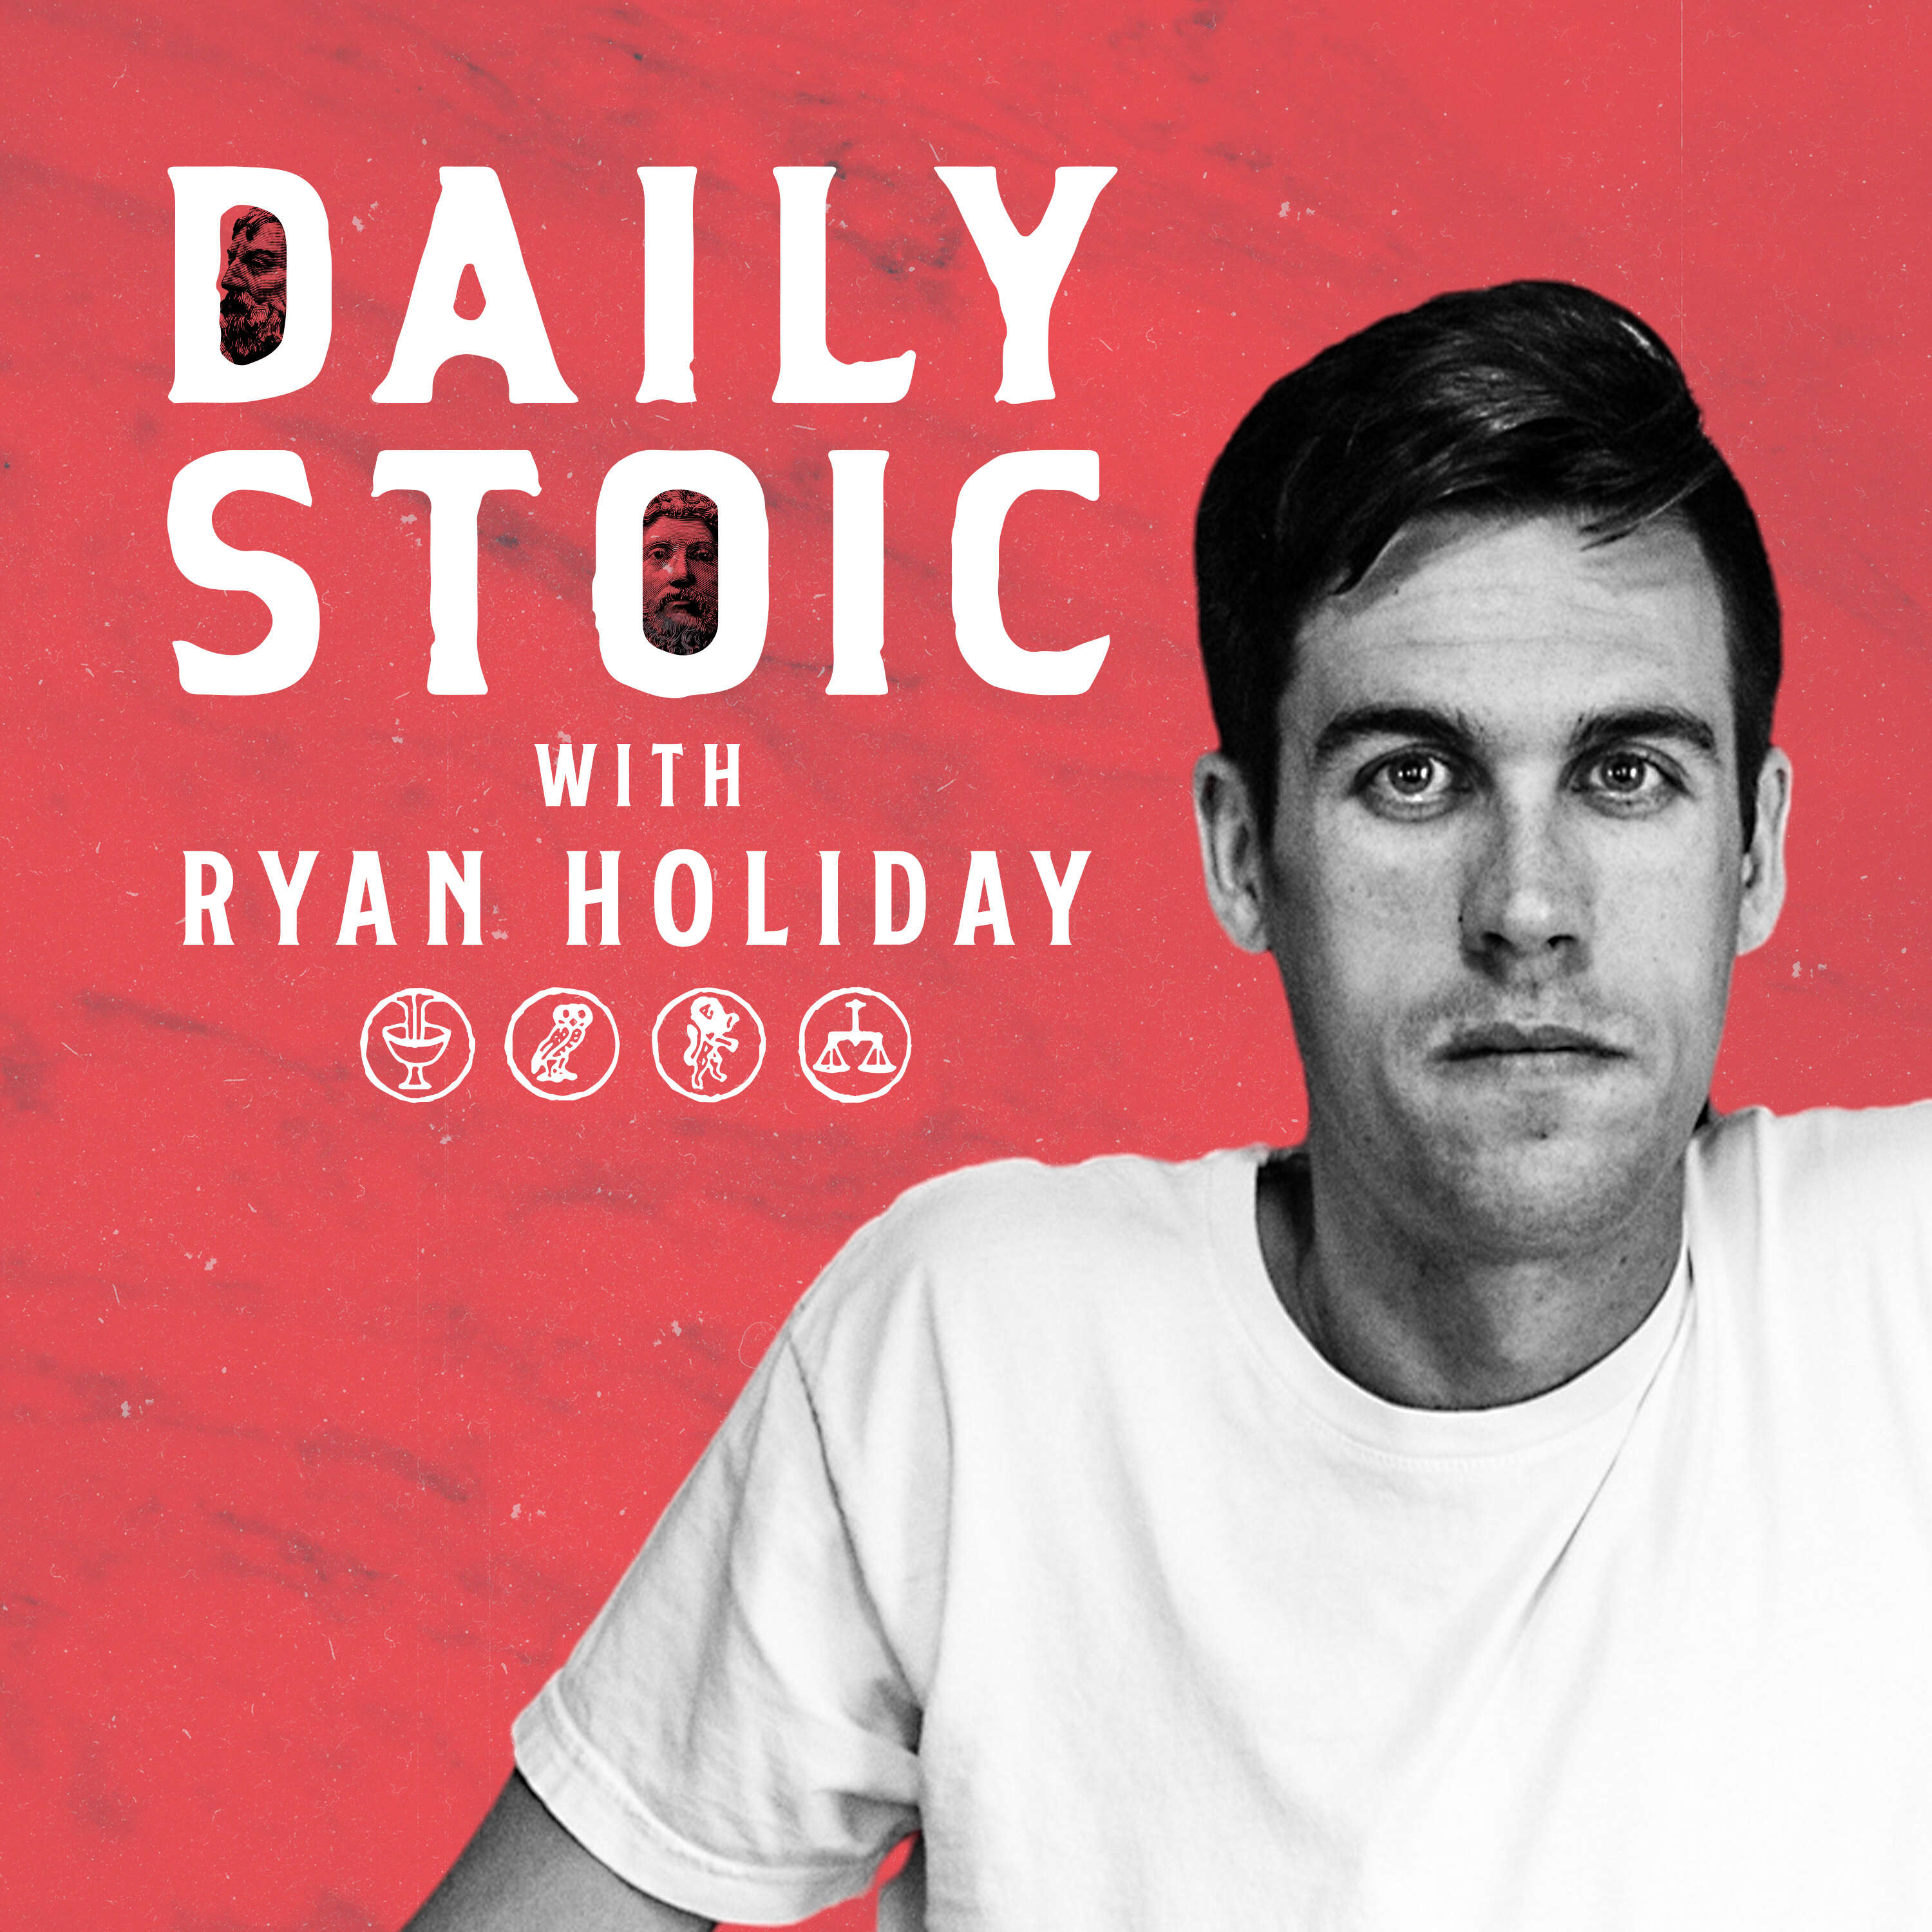 Ask Daily Stoic: Ryan and Jocko Willink On How to Thrive in Challenging Times